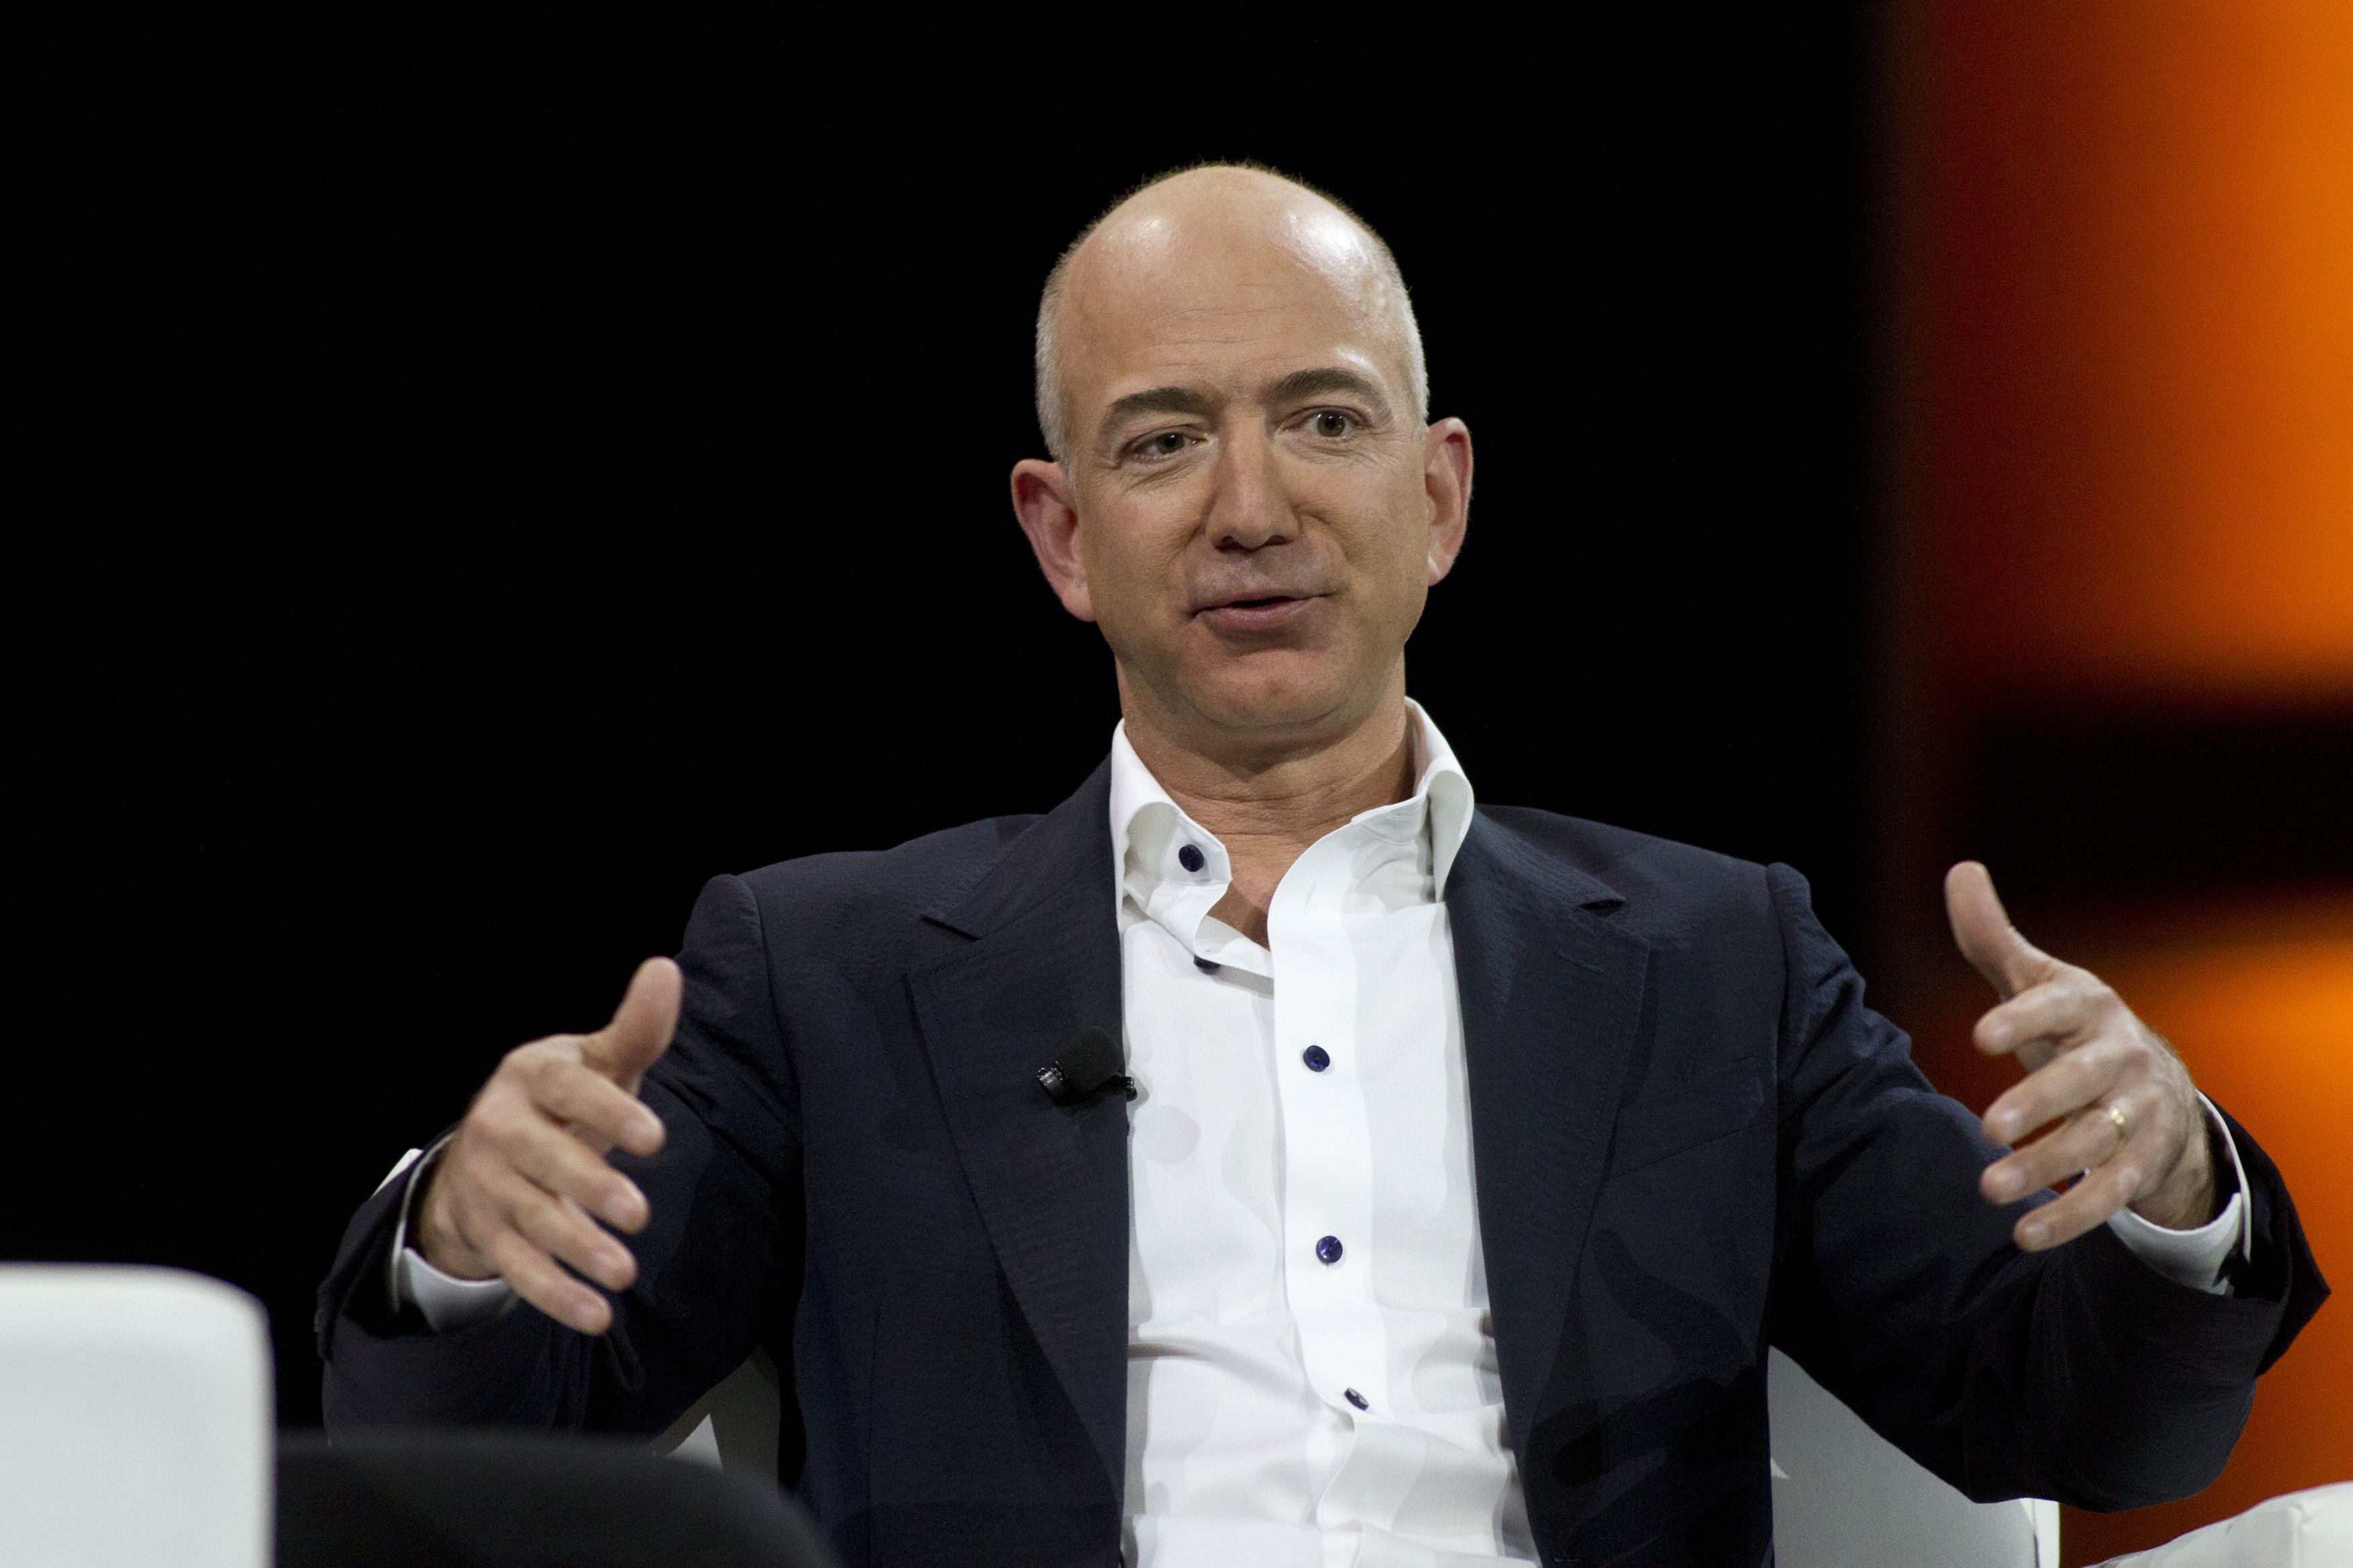 Xinhua falls for 'Bezos bought Post by mistake' spoof